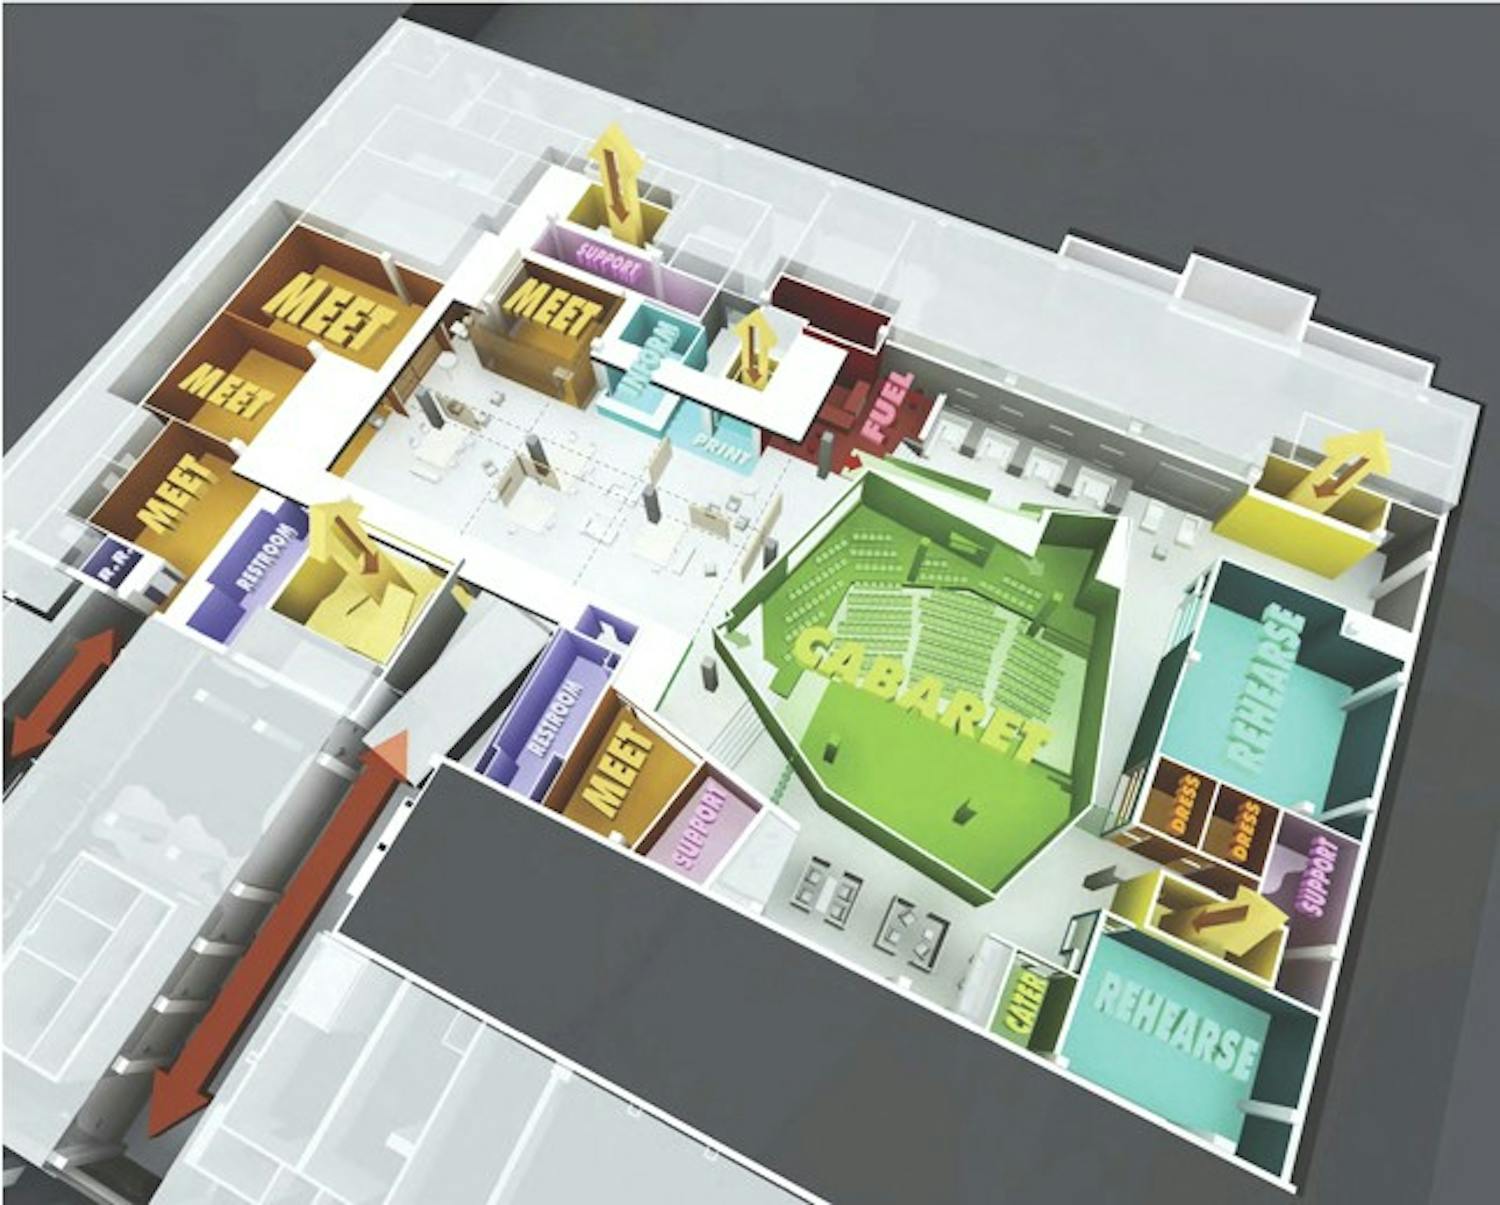 	UCOMMONS, a proposed rennovation project for the Student Union includes an all-night ground floor as well as several other updates. Courtesy of Ucommons.